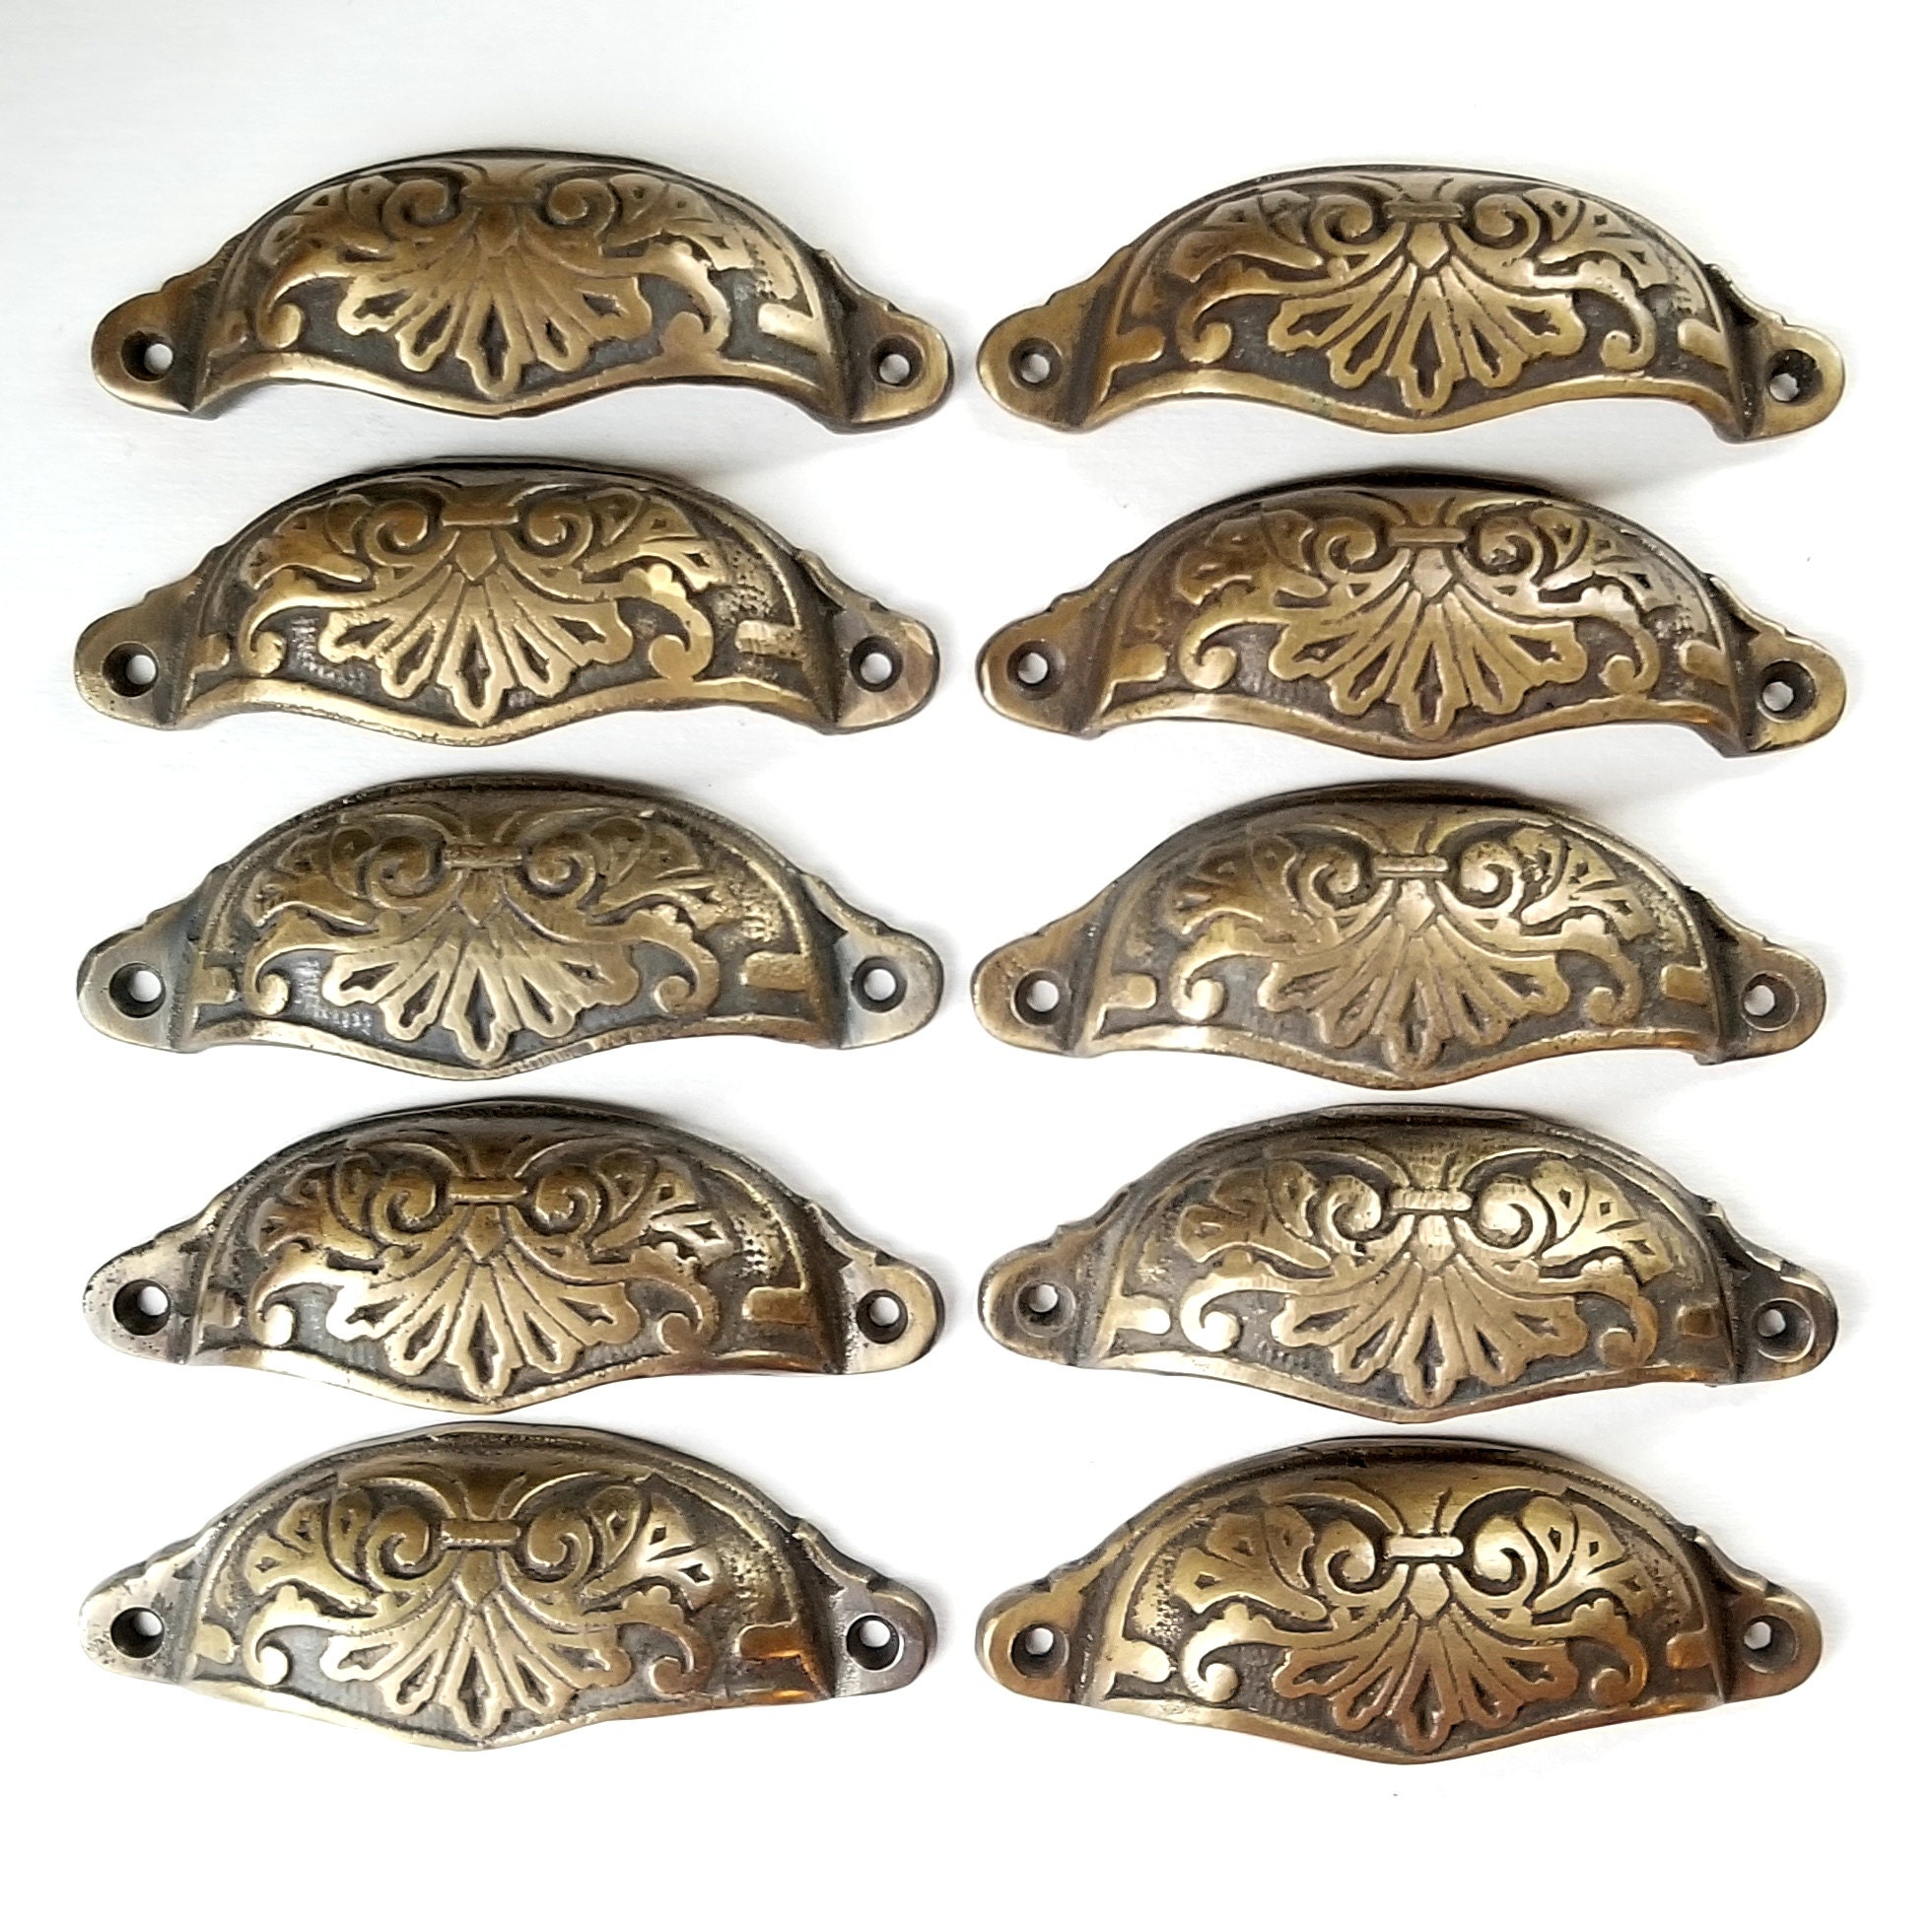 12X Antique Cupboard Cabinet Knob Cup Drawer Furniture Door Shell Pull Handles C